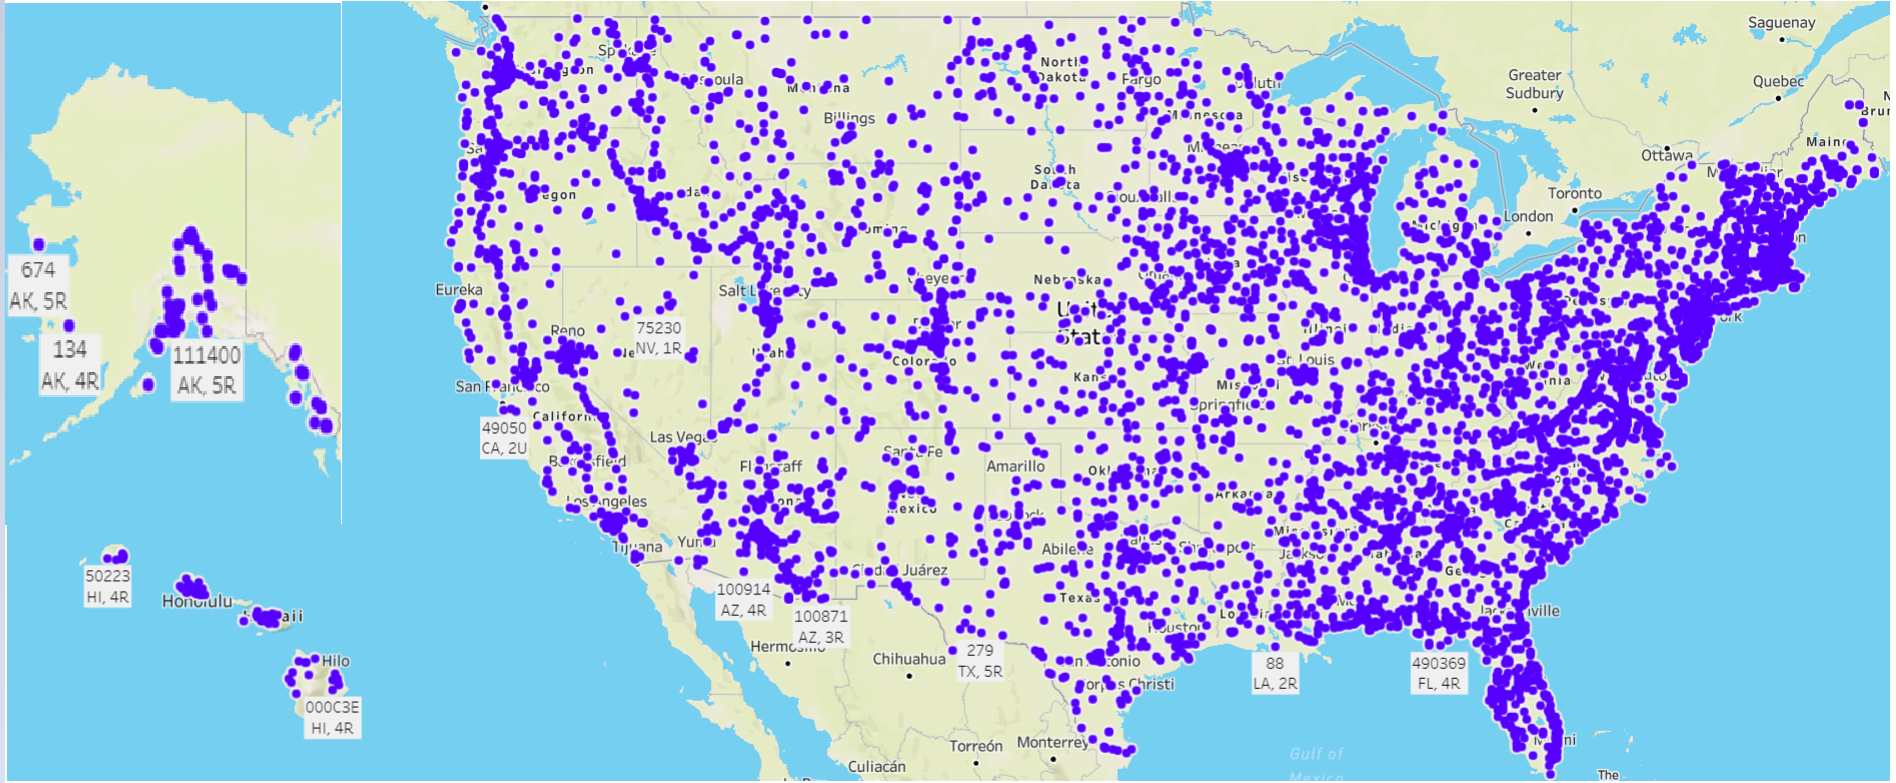 A map of Federal Highway Administration active Continuous Count Station sites in the United States. Details can be found at the link.